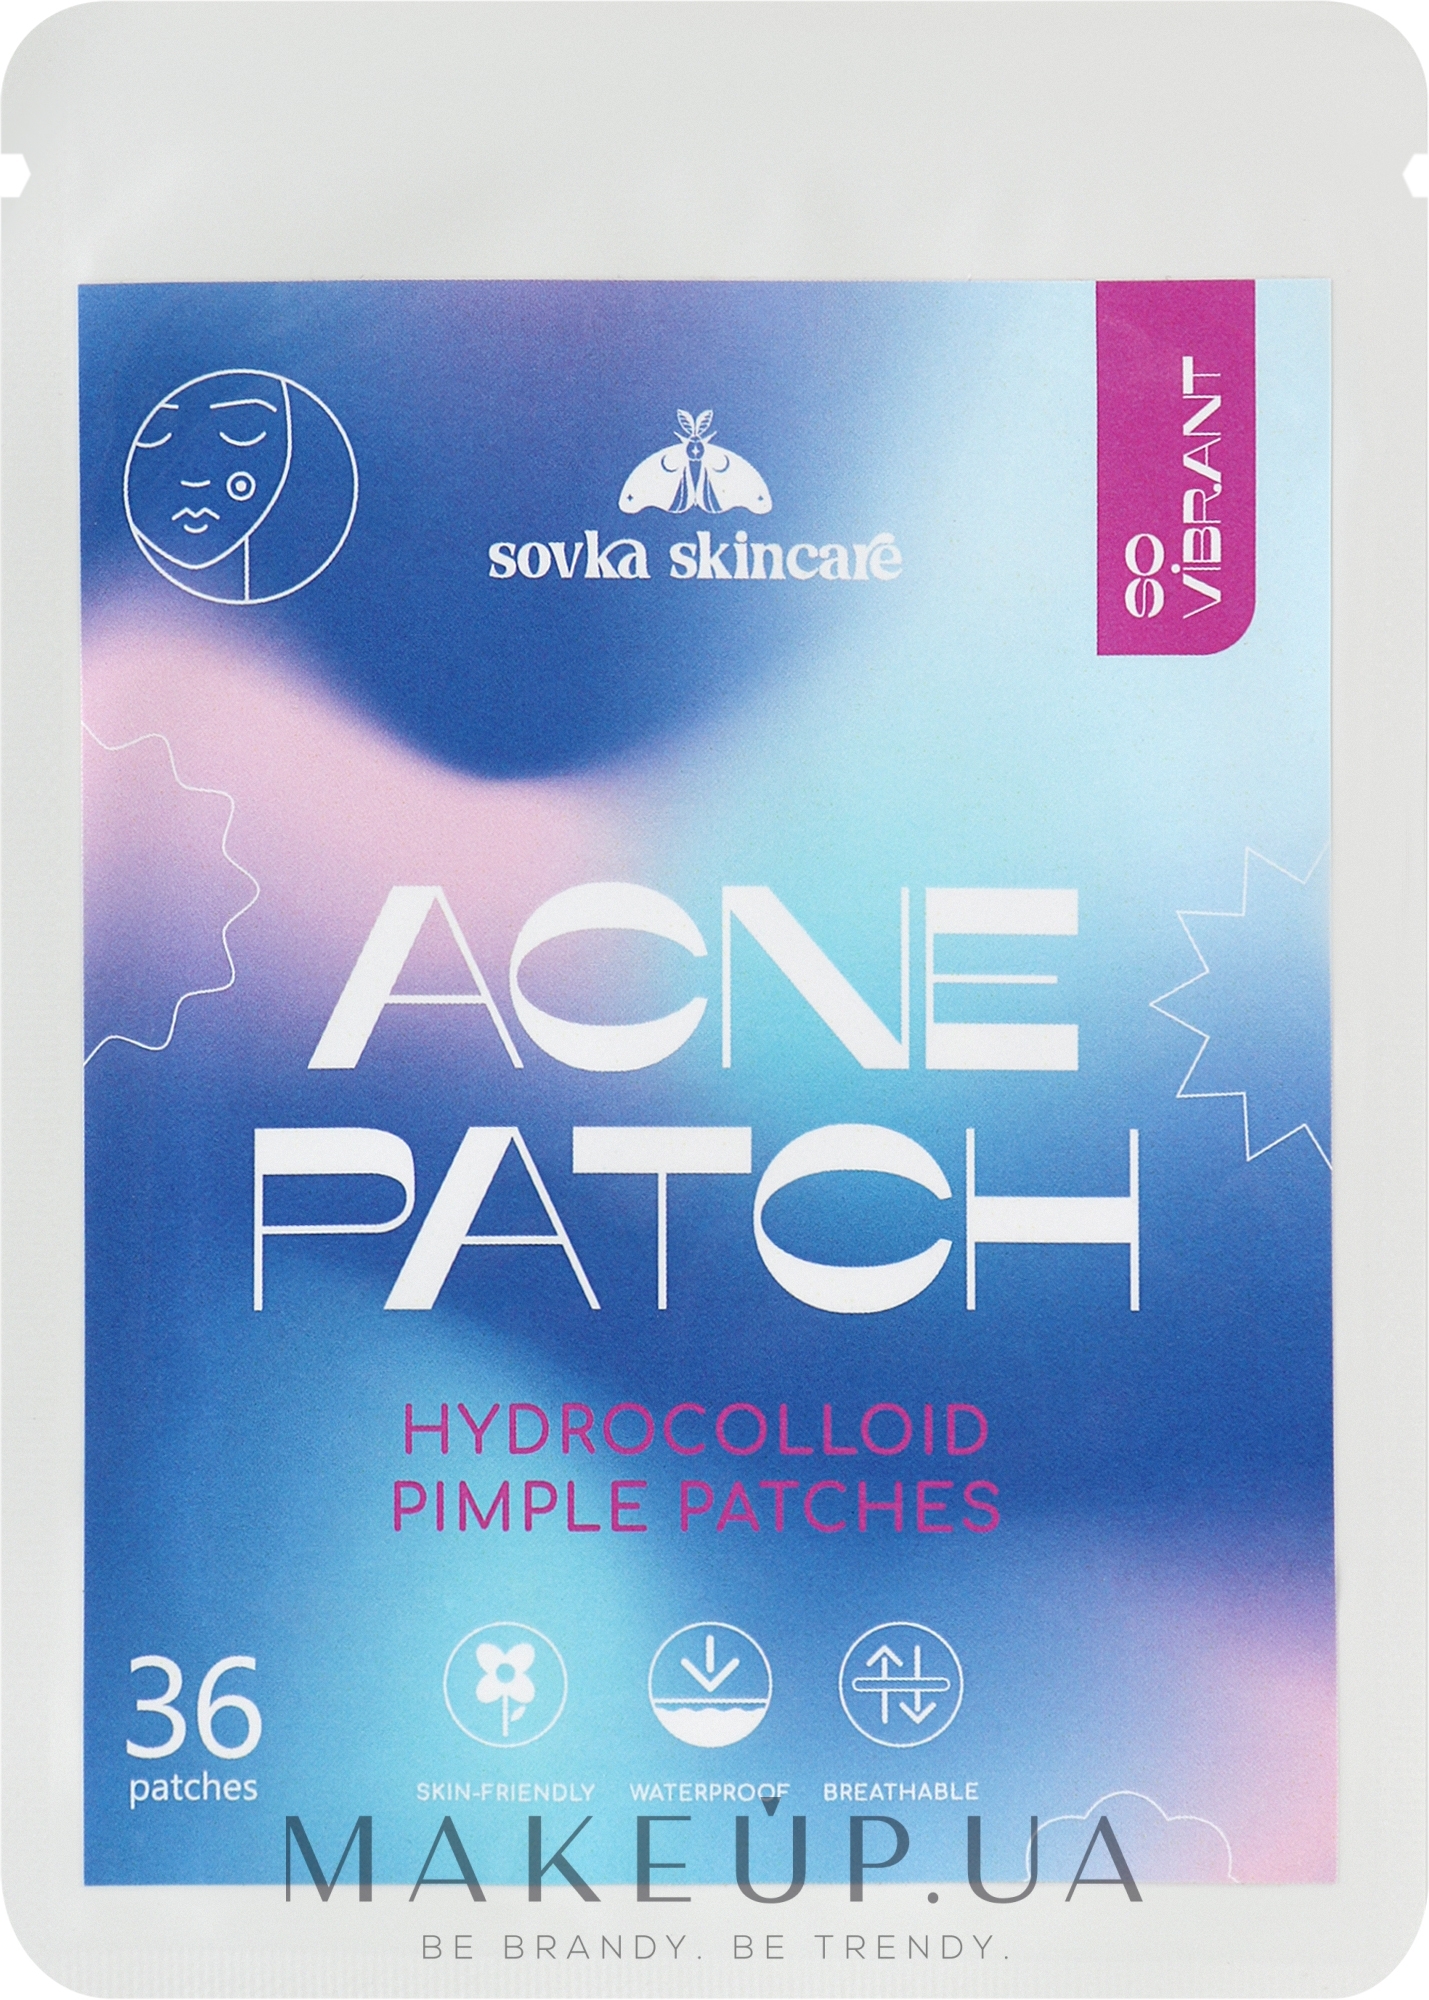 Акне-патчи от высыпаний, 36 шт. - Sovka Skincare Acne Patch Hydrocolloid Pimple Patches  — фото 36шт